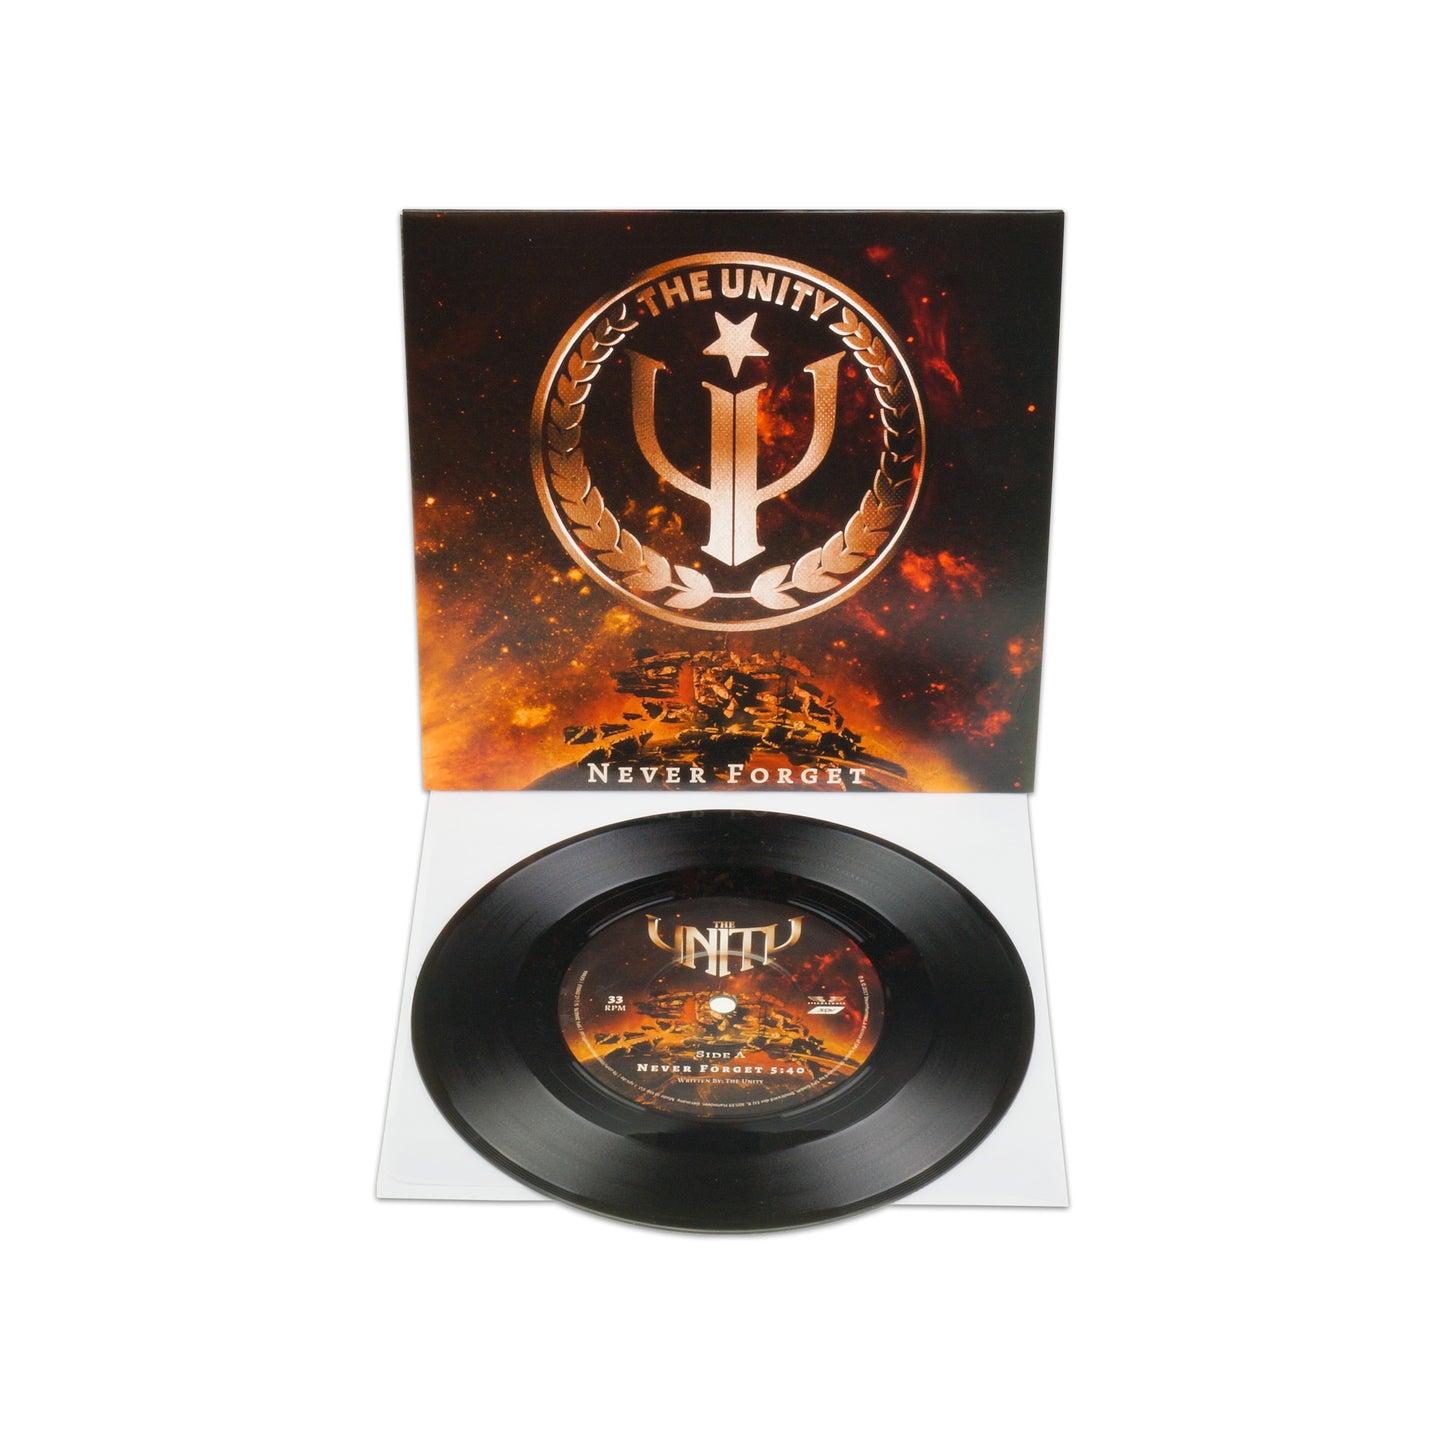 The Unity "Never Forget" LP (limited Single)